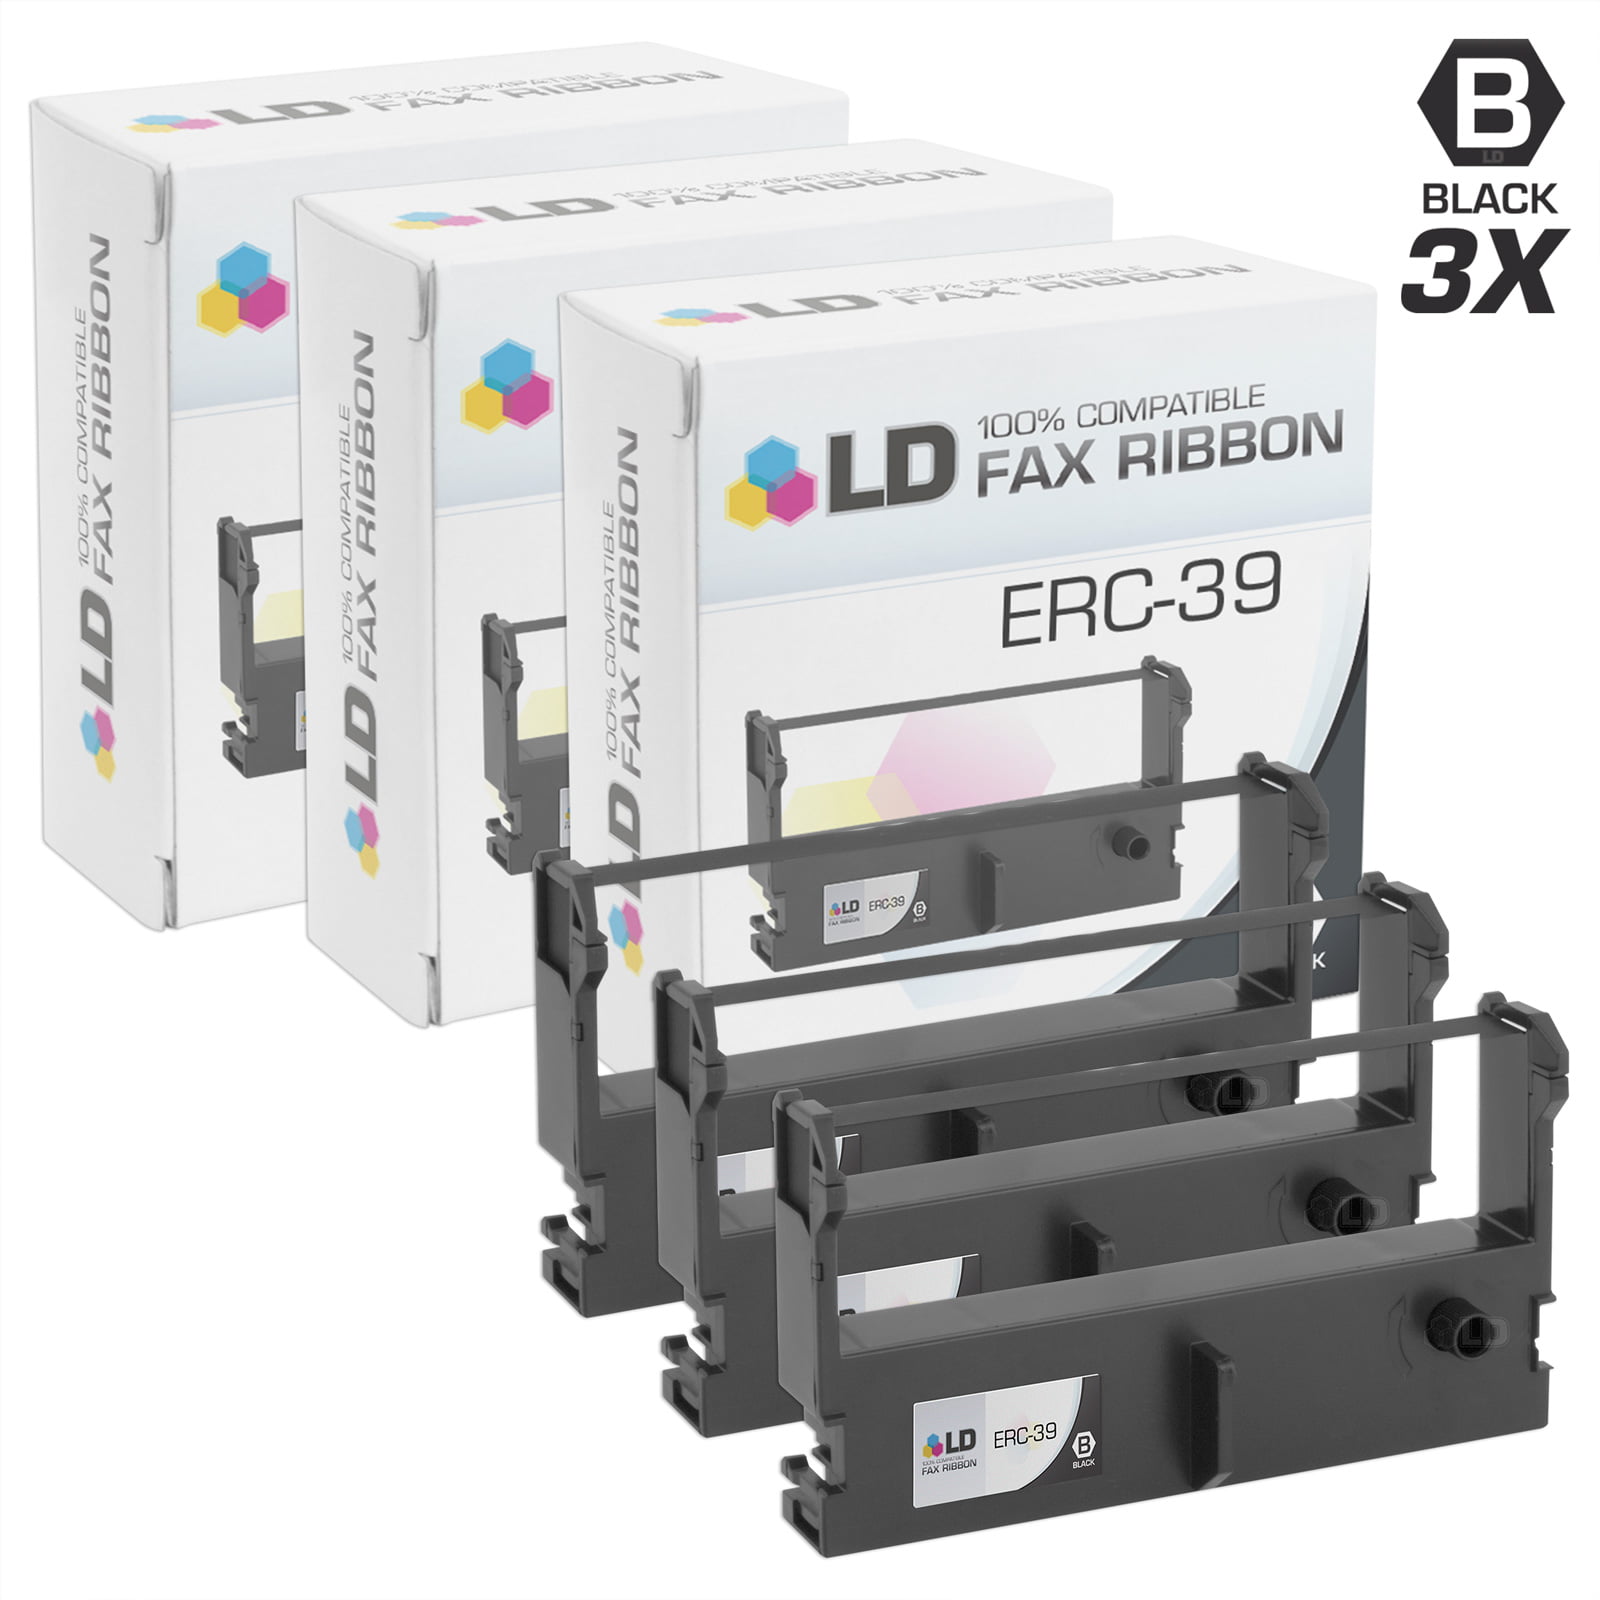 Black, 5-Pack LD Compatible Printer Ribbon Cartridge Replacement for Epson ERC-39 